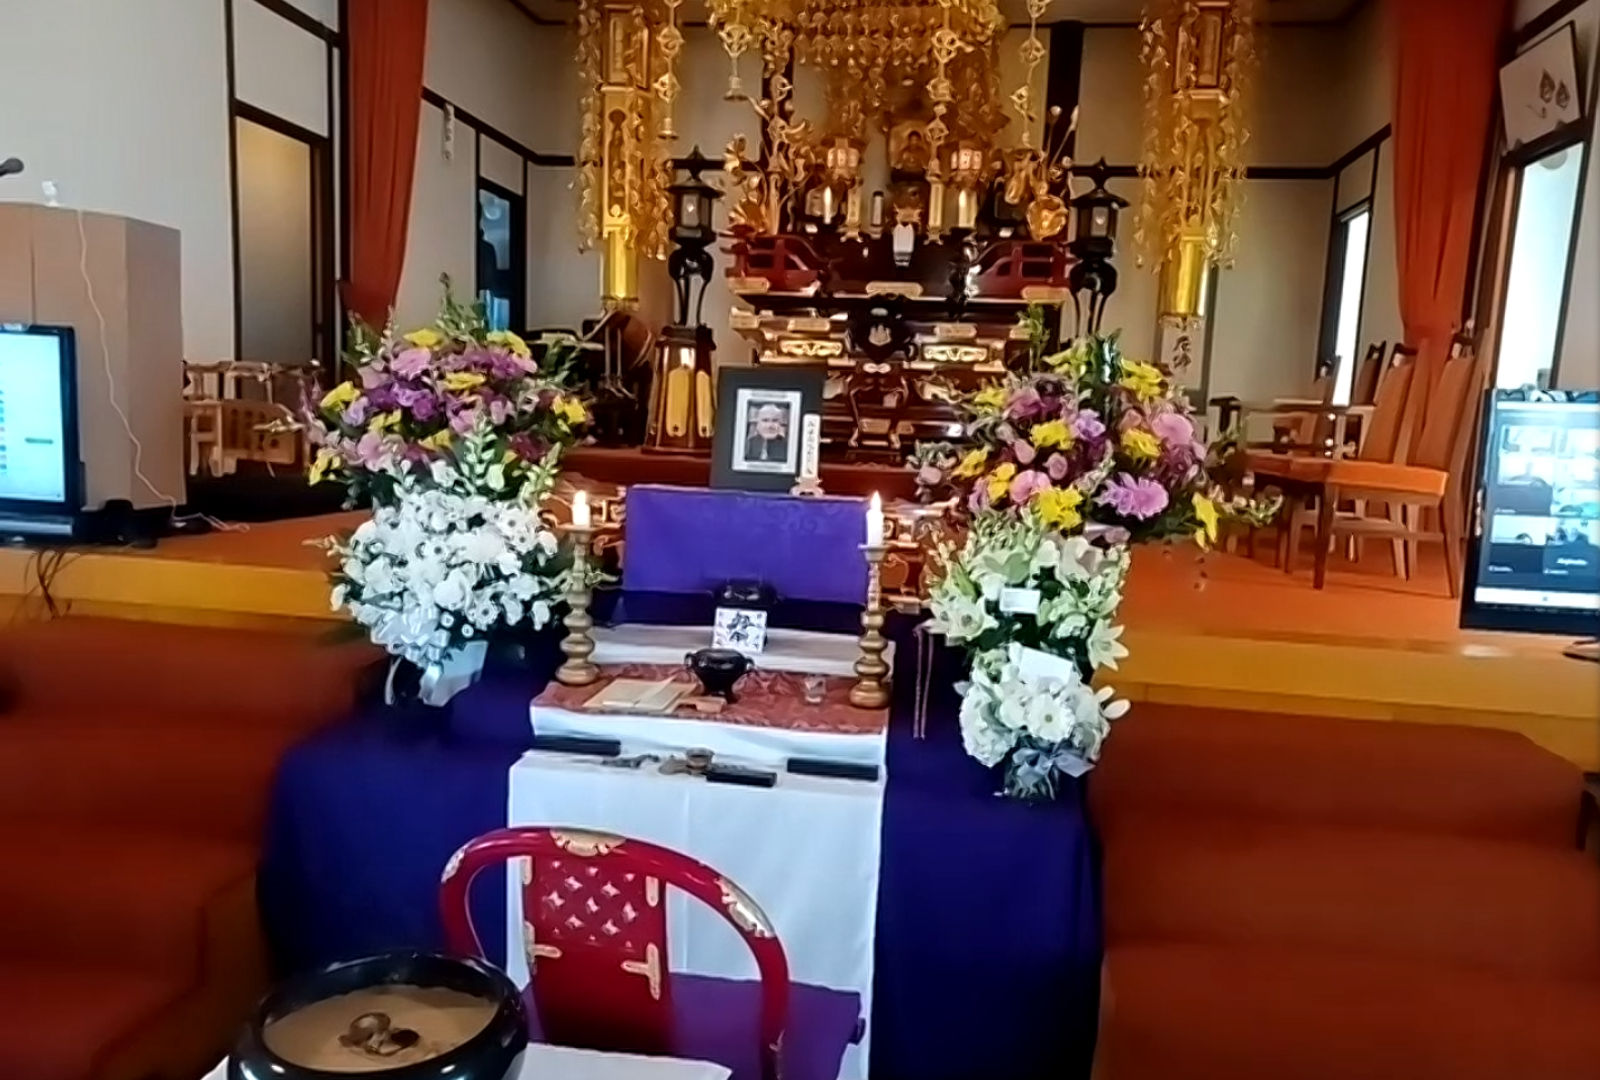 A cropped screen shot from Zoom, showing the interior of the Sozenji Buddhist Temple during the memorial service for Francis Takahashi.